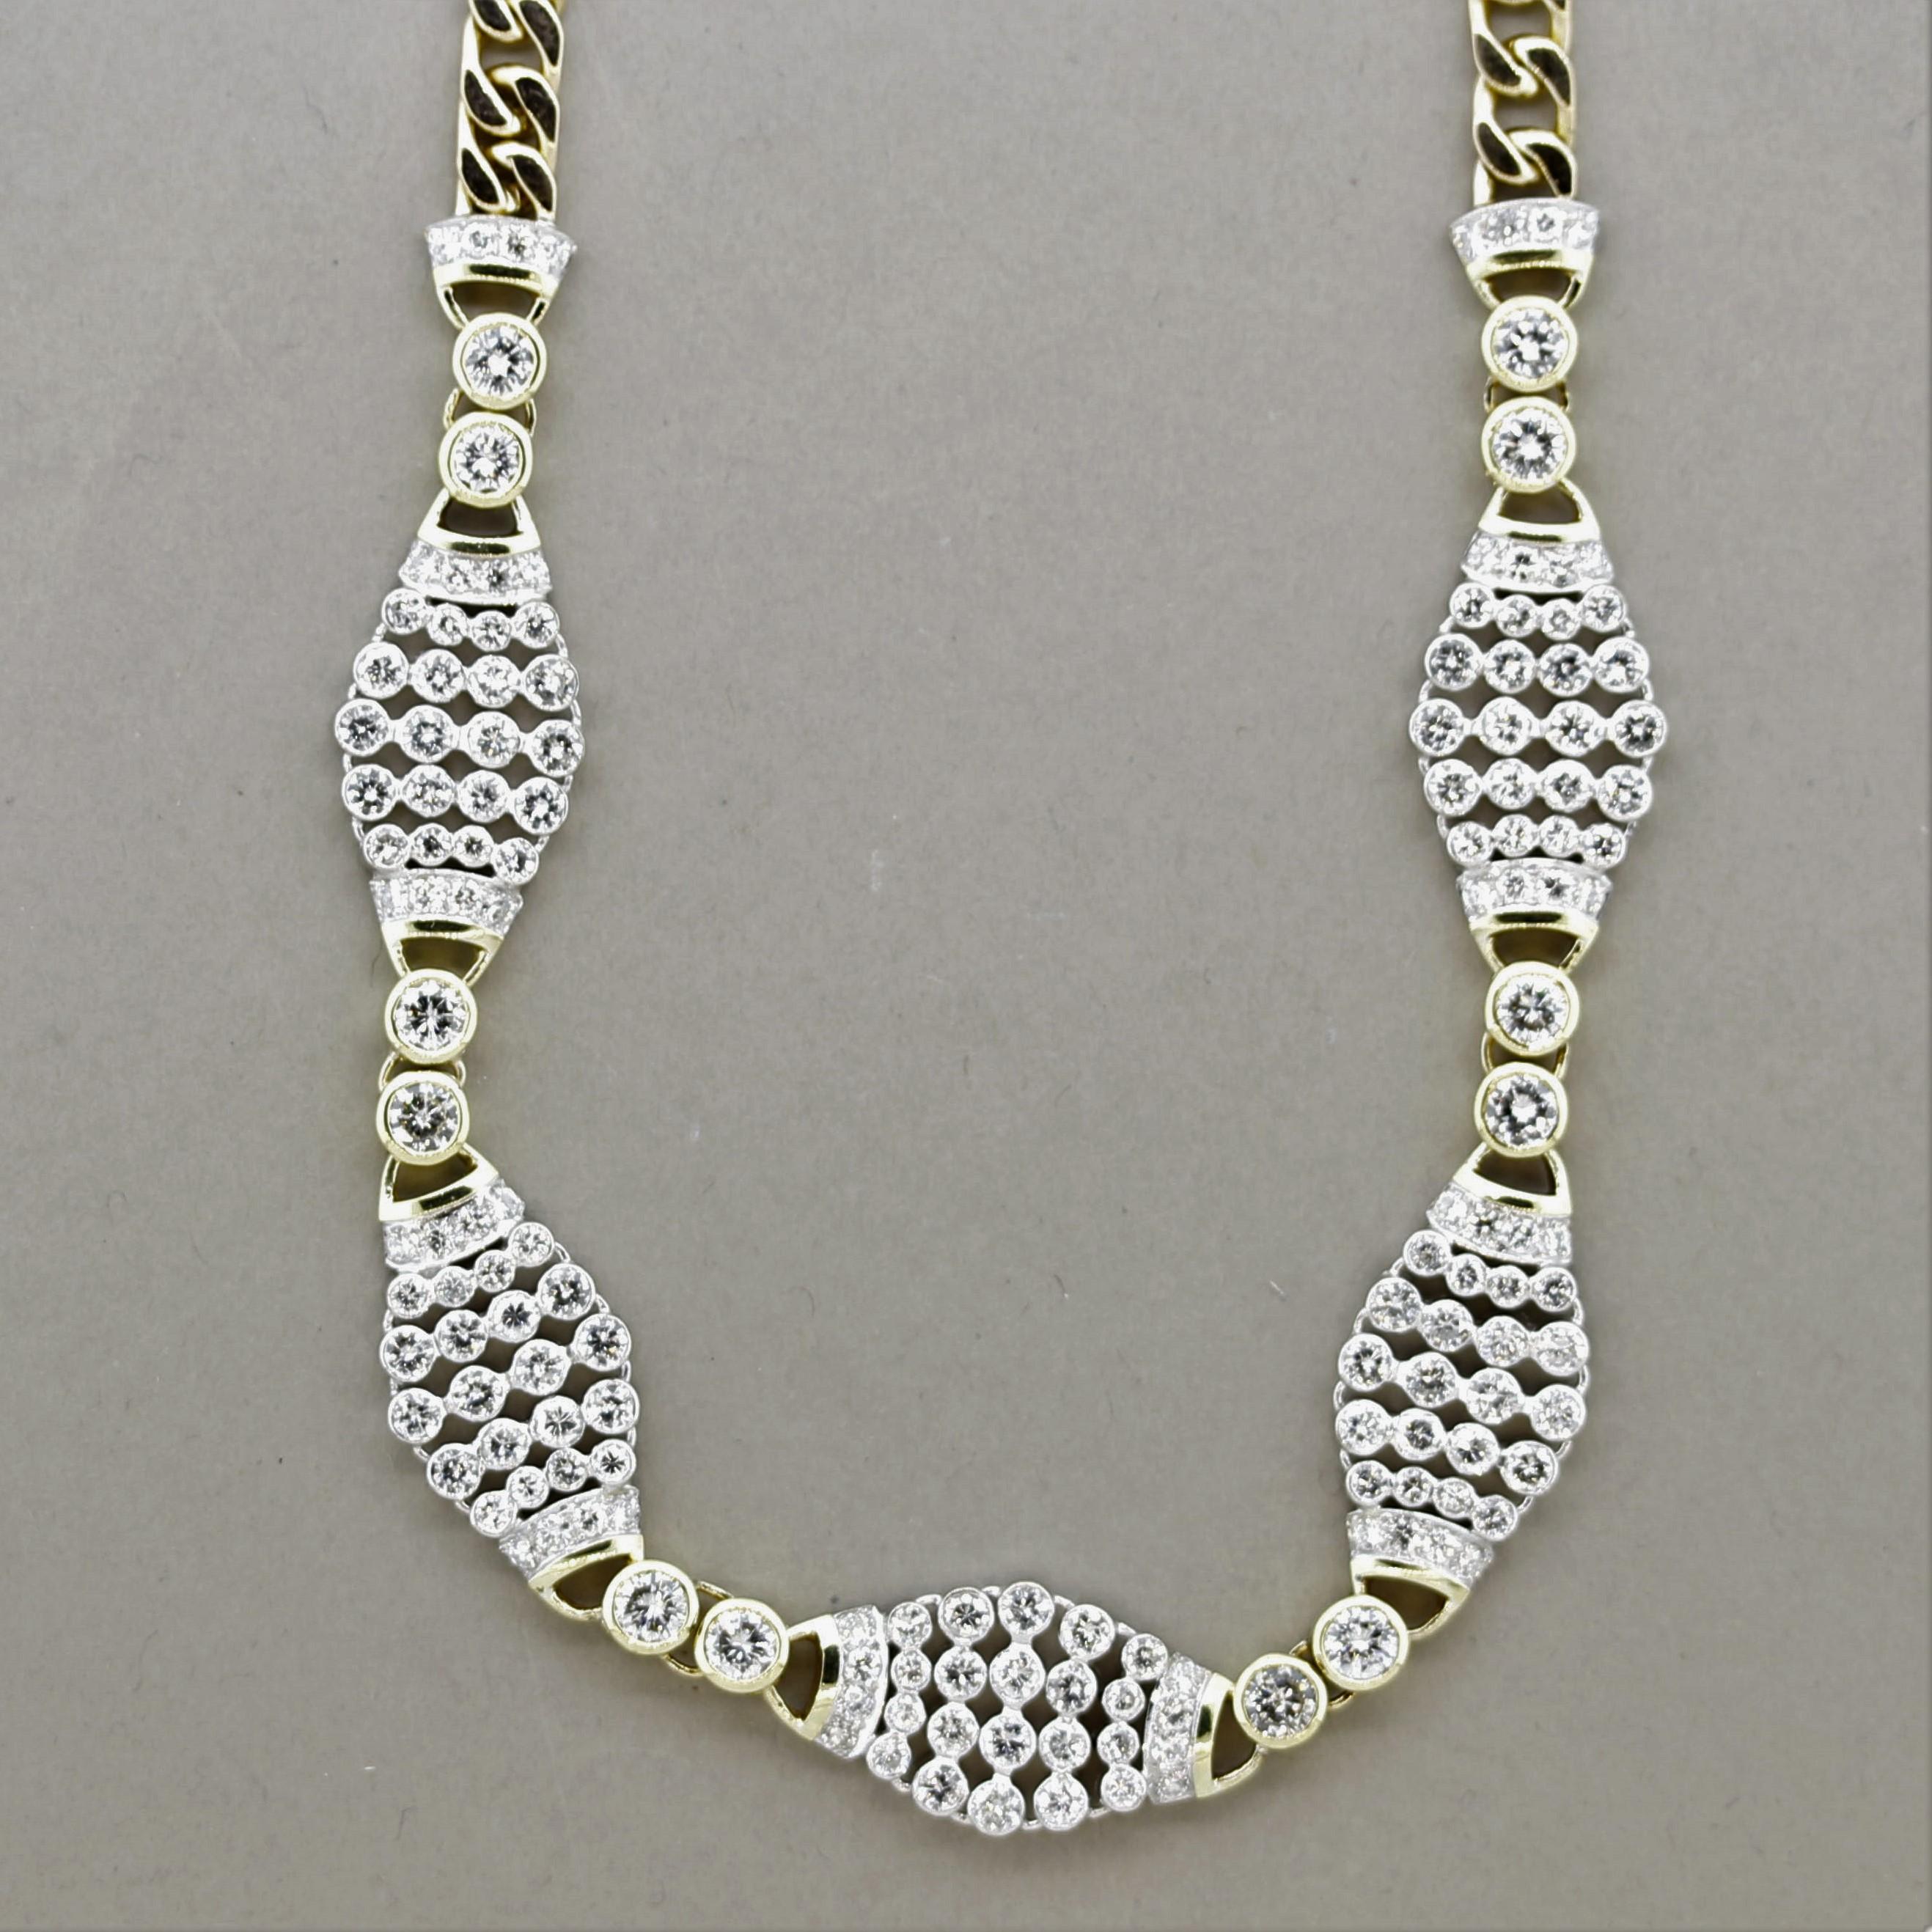 A unique and stylish choker necklace! It features 7.90 carats of large and fine round brilliant-cut diamonds which are bezel-set in stylish patterns around the necklace. It is finished in a cuban-link design that extends to the ends of the necklace.